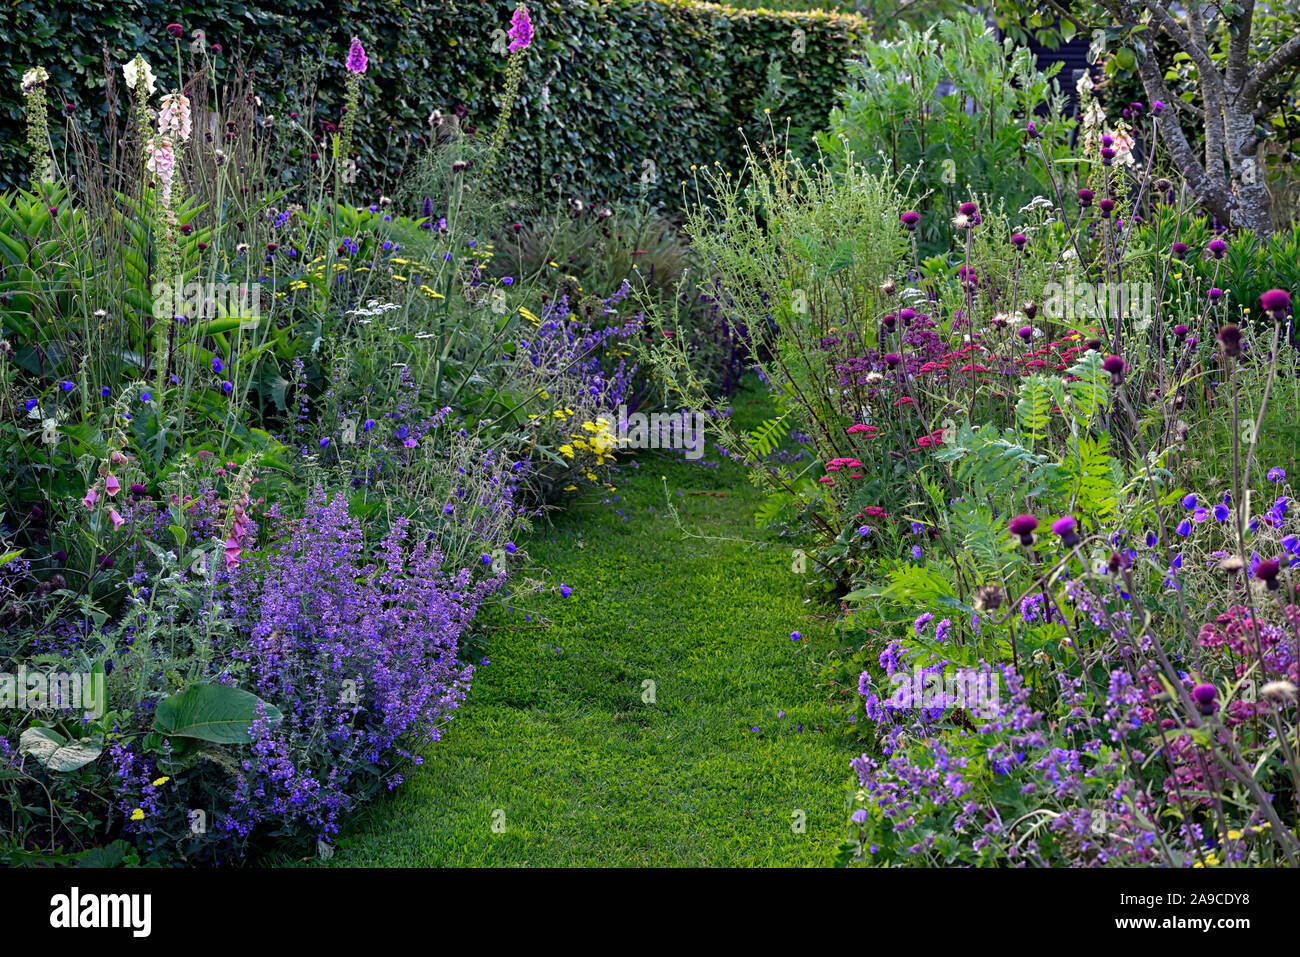 cottage garden,path,pathway,mown,phlomis fruticosa,yarrow,blue,red,pink,yellow,flowers,nepeta,lupin,double herbaceous borders,path,pathway,garden,gard Stock Photo